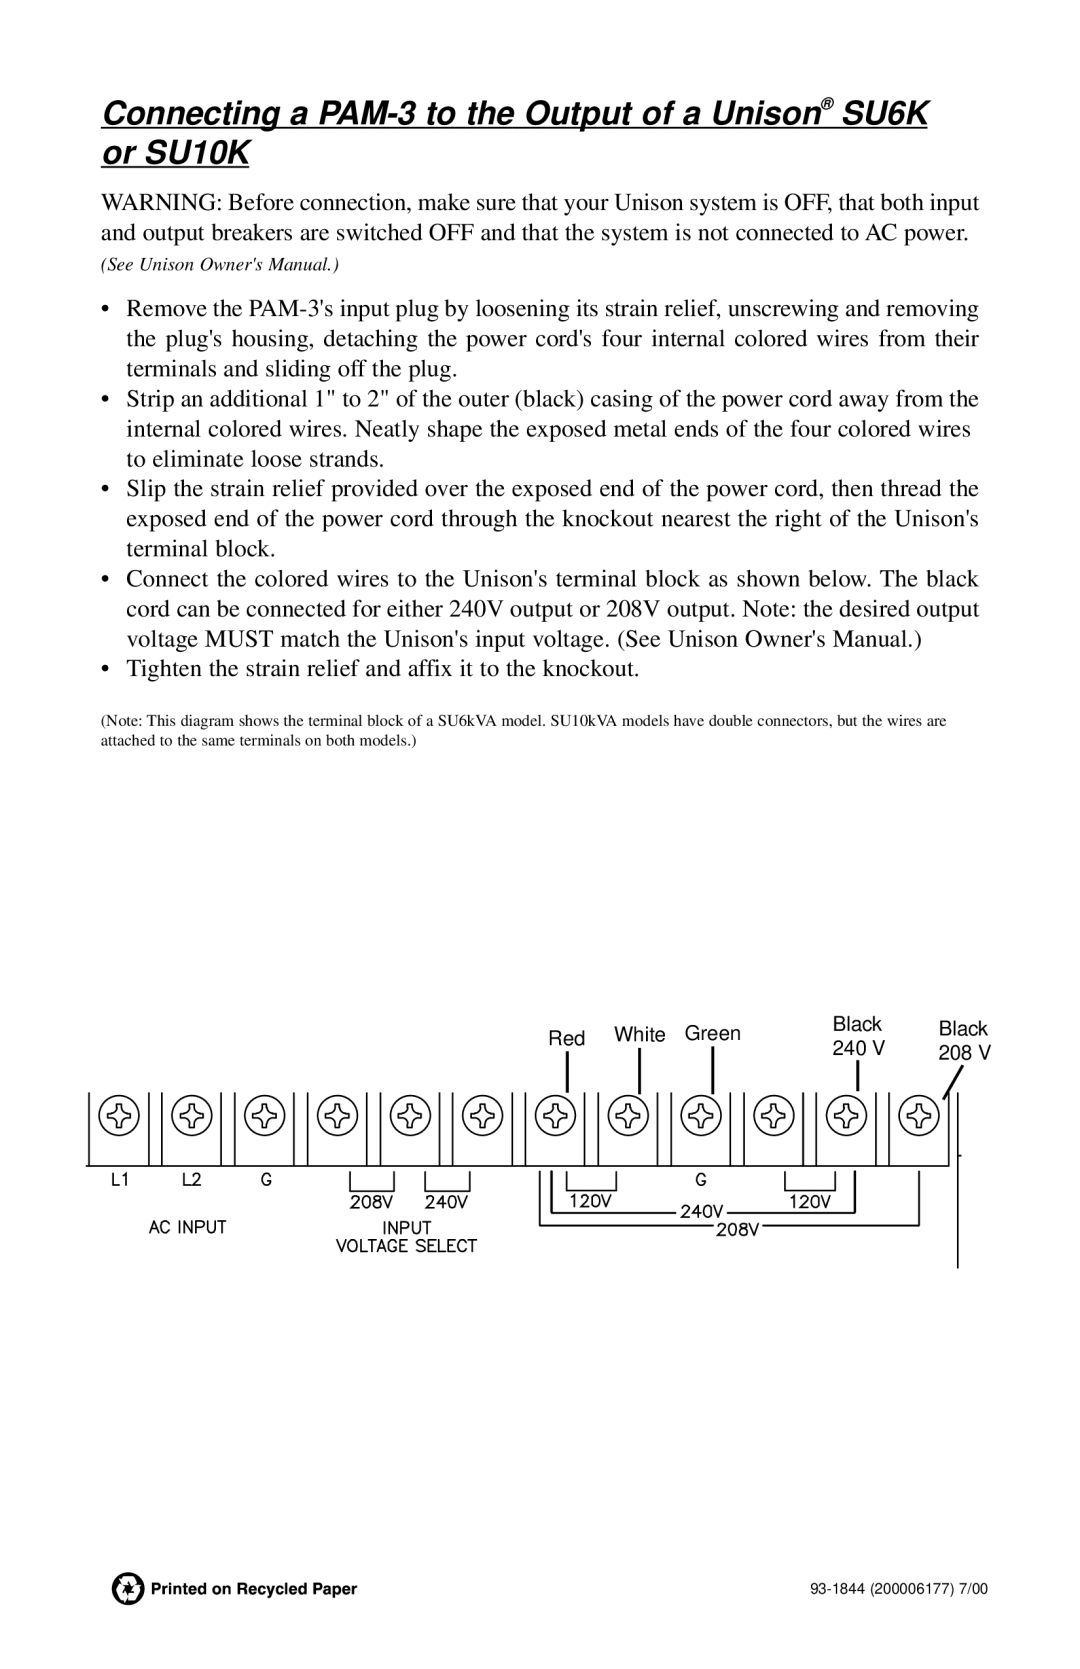 Tripp Lite instruction sheet Connecting a PAM-3 to the Output of a Unison SU6K or SU10K 